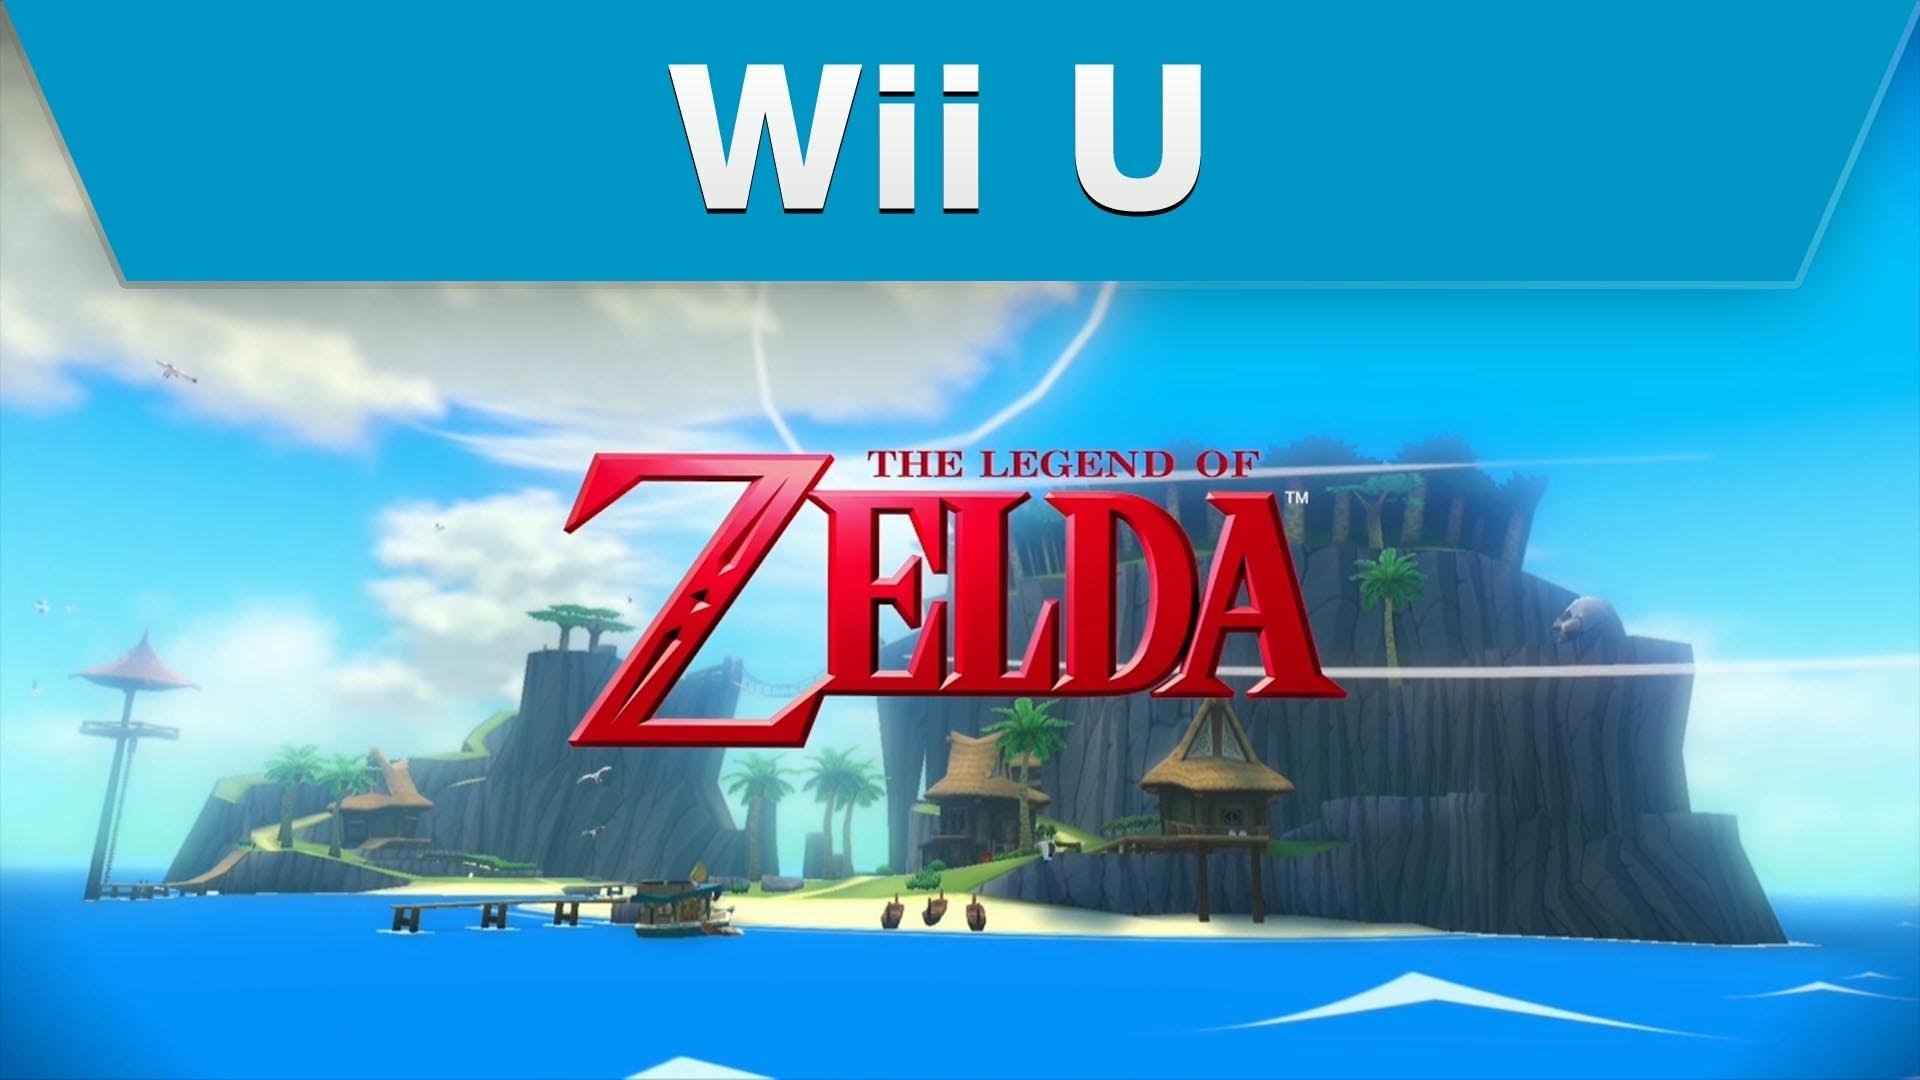 HD wallpaper featuring the logo of The Legend of Zelda: The Wind Waker HD for Wii U with a scenic island backdrop.